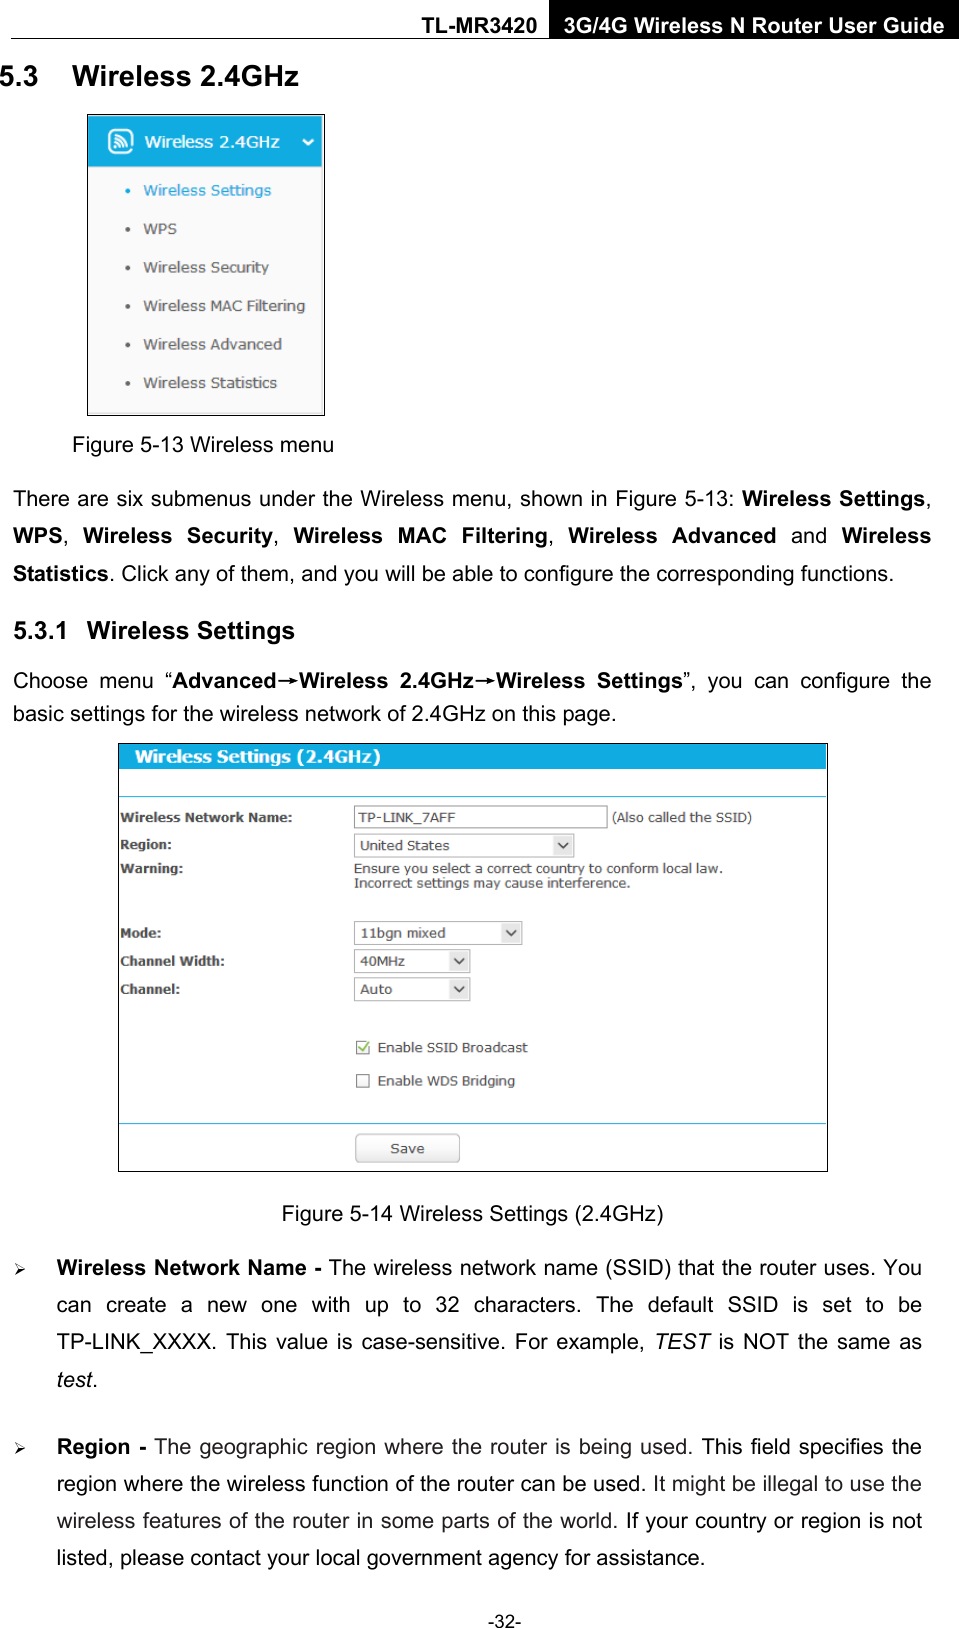    -32- TL-MR3420 3G/4G Wireless N Router User Guide 5.3 Wireless 2.4GHz  Figure 5-13 Wireless menu There are six submenus under the Wireless menu, shown in Figure 5-13: Wireless Settings, WPS,  Wireless Security,  Wireless MAC Filtering,  Wireless Advanced and Wireless Statistics. Click any of them, and you will be able to configure the corresponding functions.   5.3.1 Wireless Settings Choose menu “Advanced→Wireless 2.4GHz→Wireless Settings”, you can configure the basic settings for the wireless network of 2.4GHz on this page.  Figure 5-14 Wireless Settings (2.4GHz)  Wireless Network Name - The wireless network name (SSID) that the router uses. You can create a new one with up to 32 characters. The default SSID is set to be TP-LINK_XXXX. This value is case-sensitive. For example, TEST  is NOT the same as test.    Region - The geographic region where the router is being used. This field specifies the region where the wireless function of the router can be used. It might be illegal to use the wireless features of the router in some parts of the world. If your country or region is not listed, please contact your local government agency for assistance. 